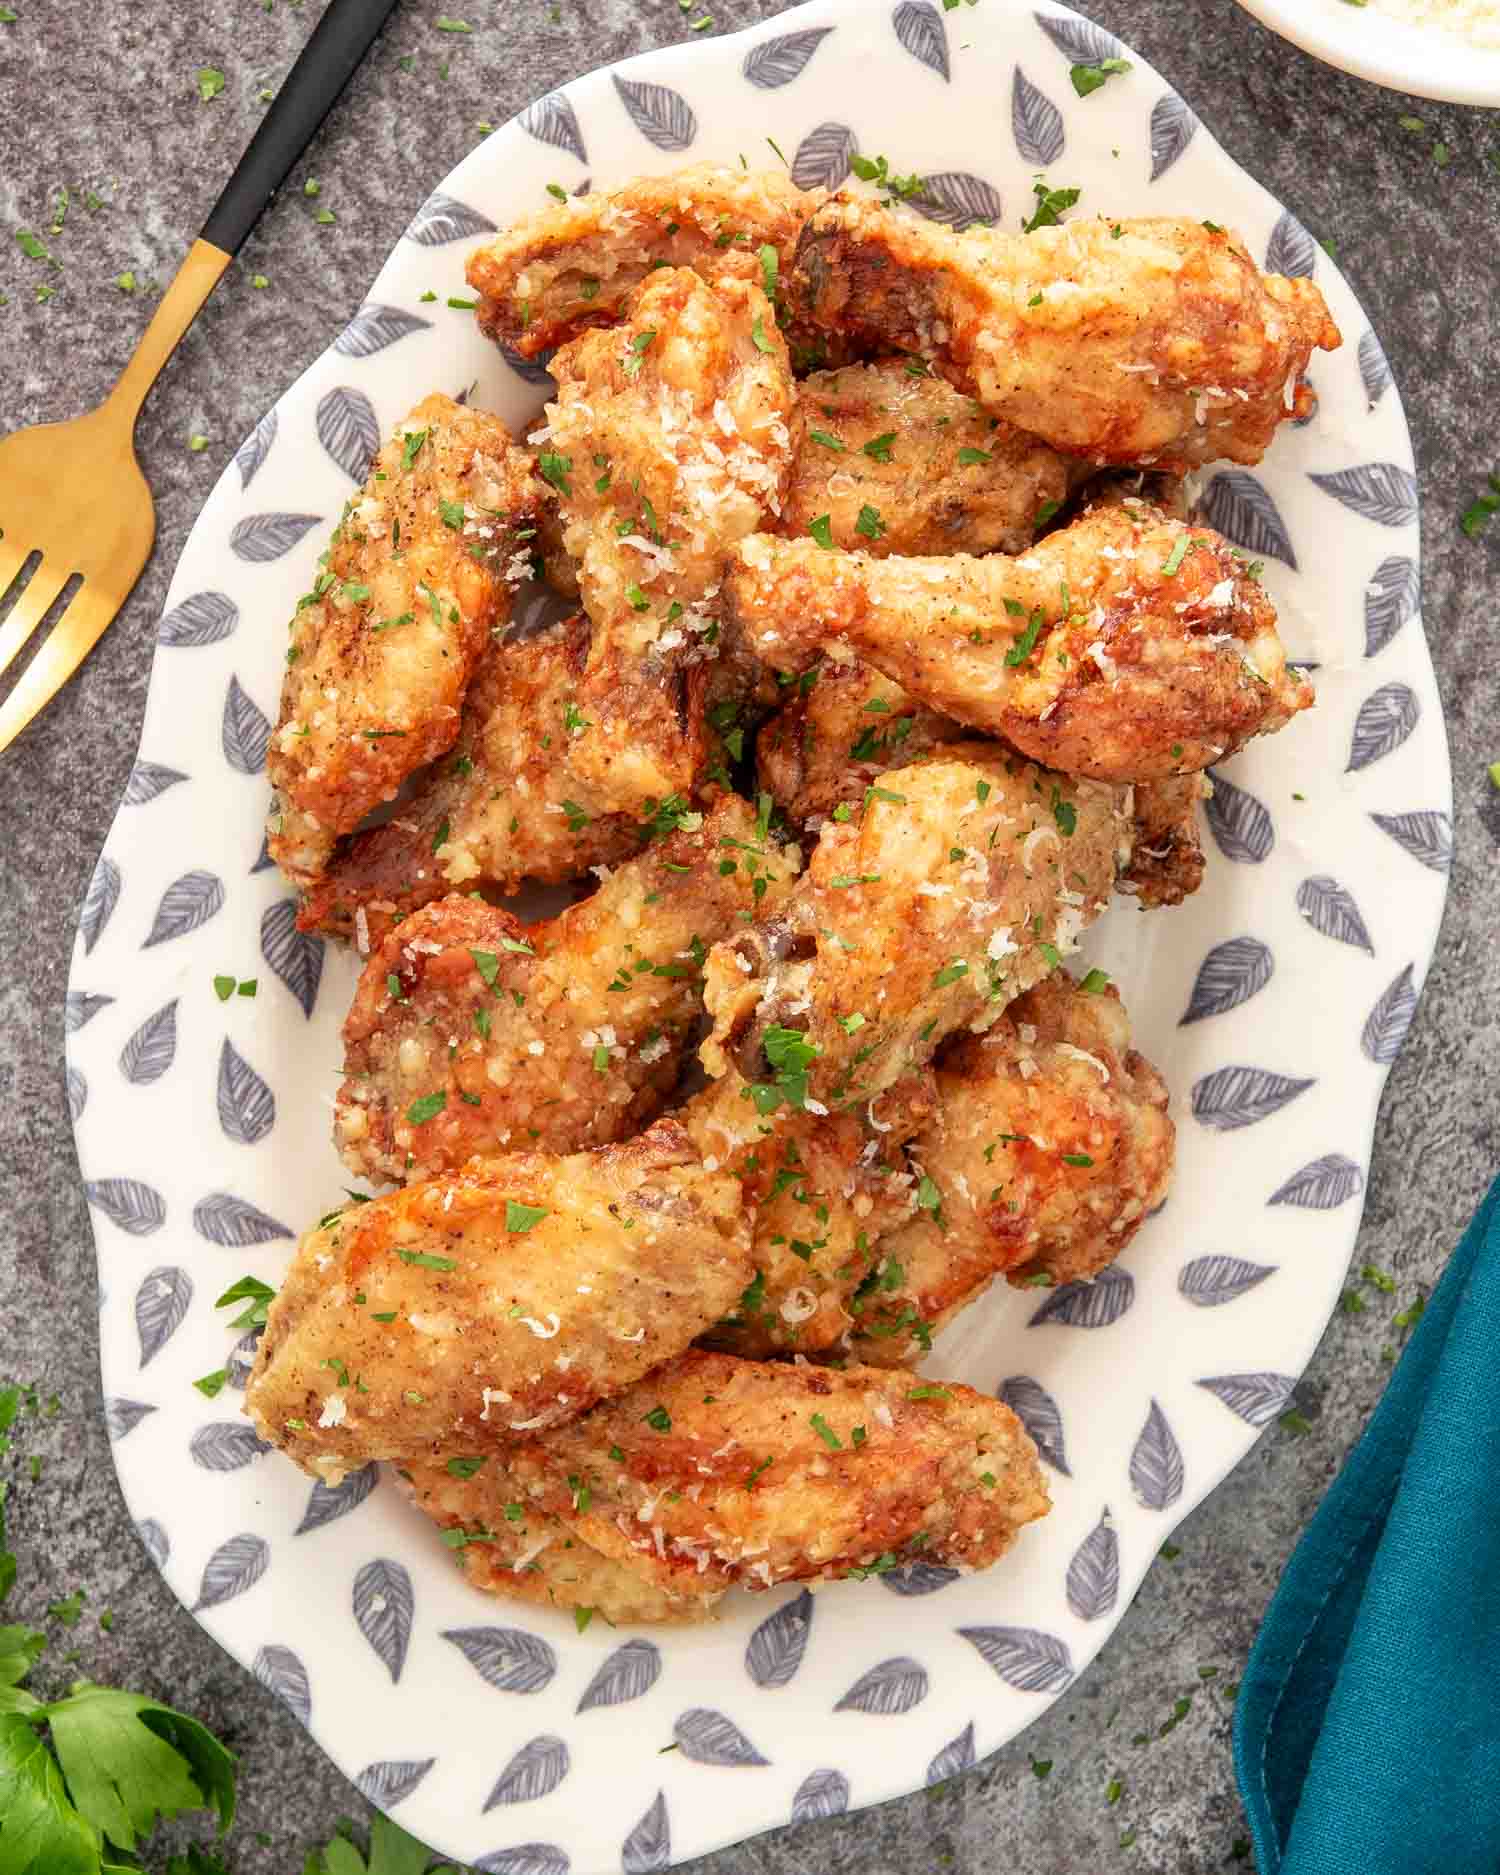 freshly made garlic parmesan wings on a white plate.